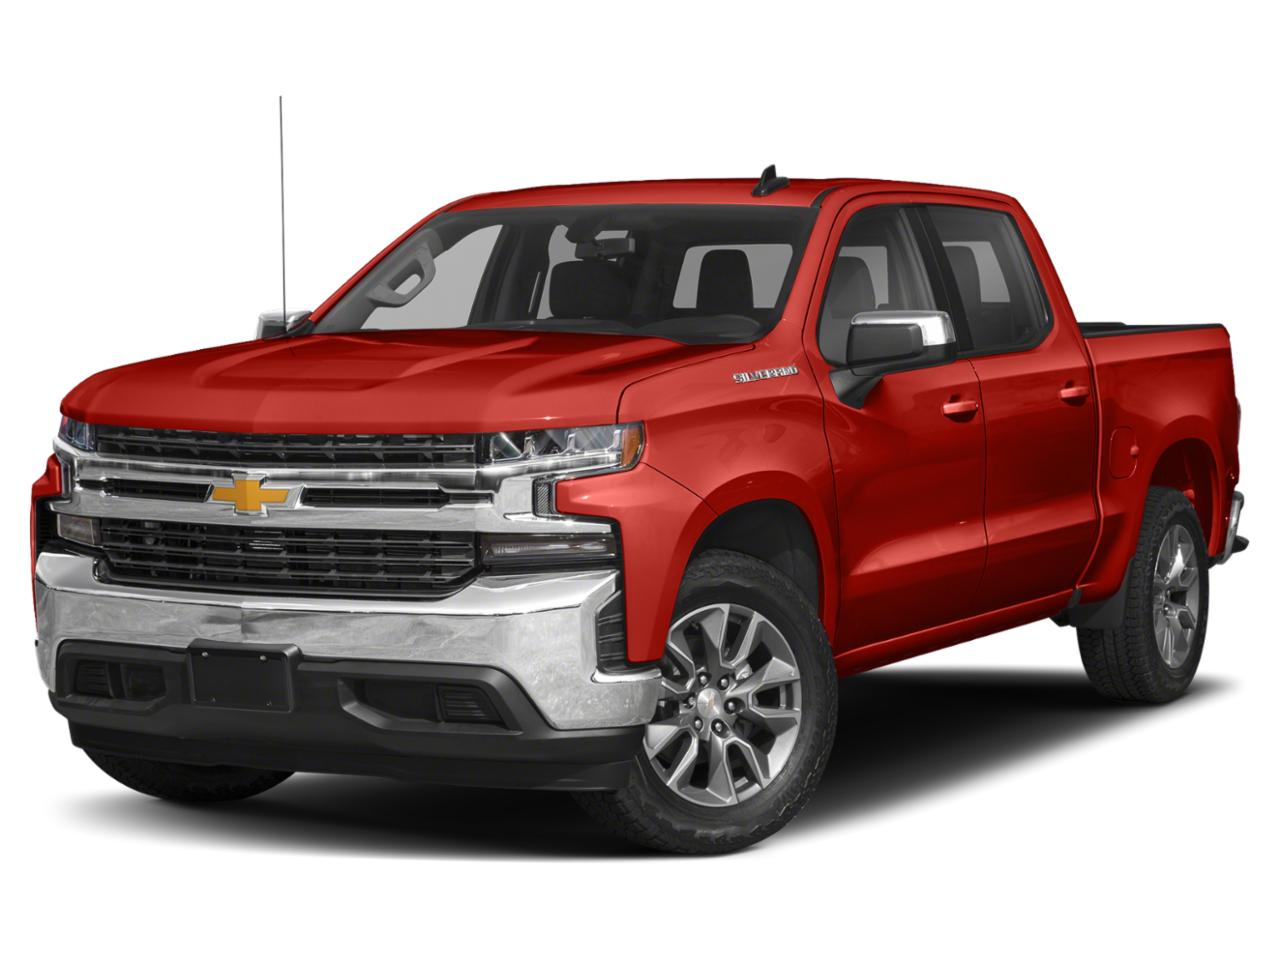 Used 2019 Chevrolet Silverado 1500 LT with VIN 1GCUYDED4KZ188324 for sale in Pine River, Minnesota